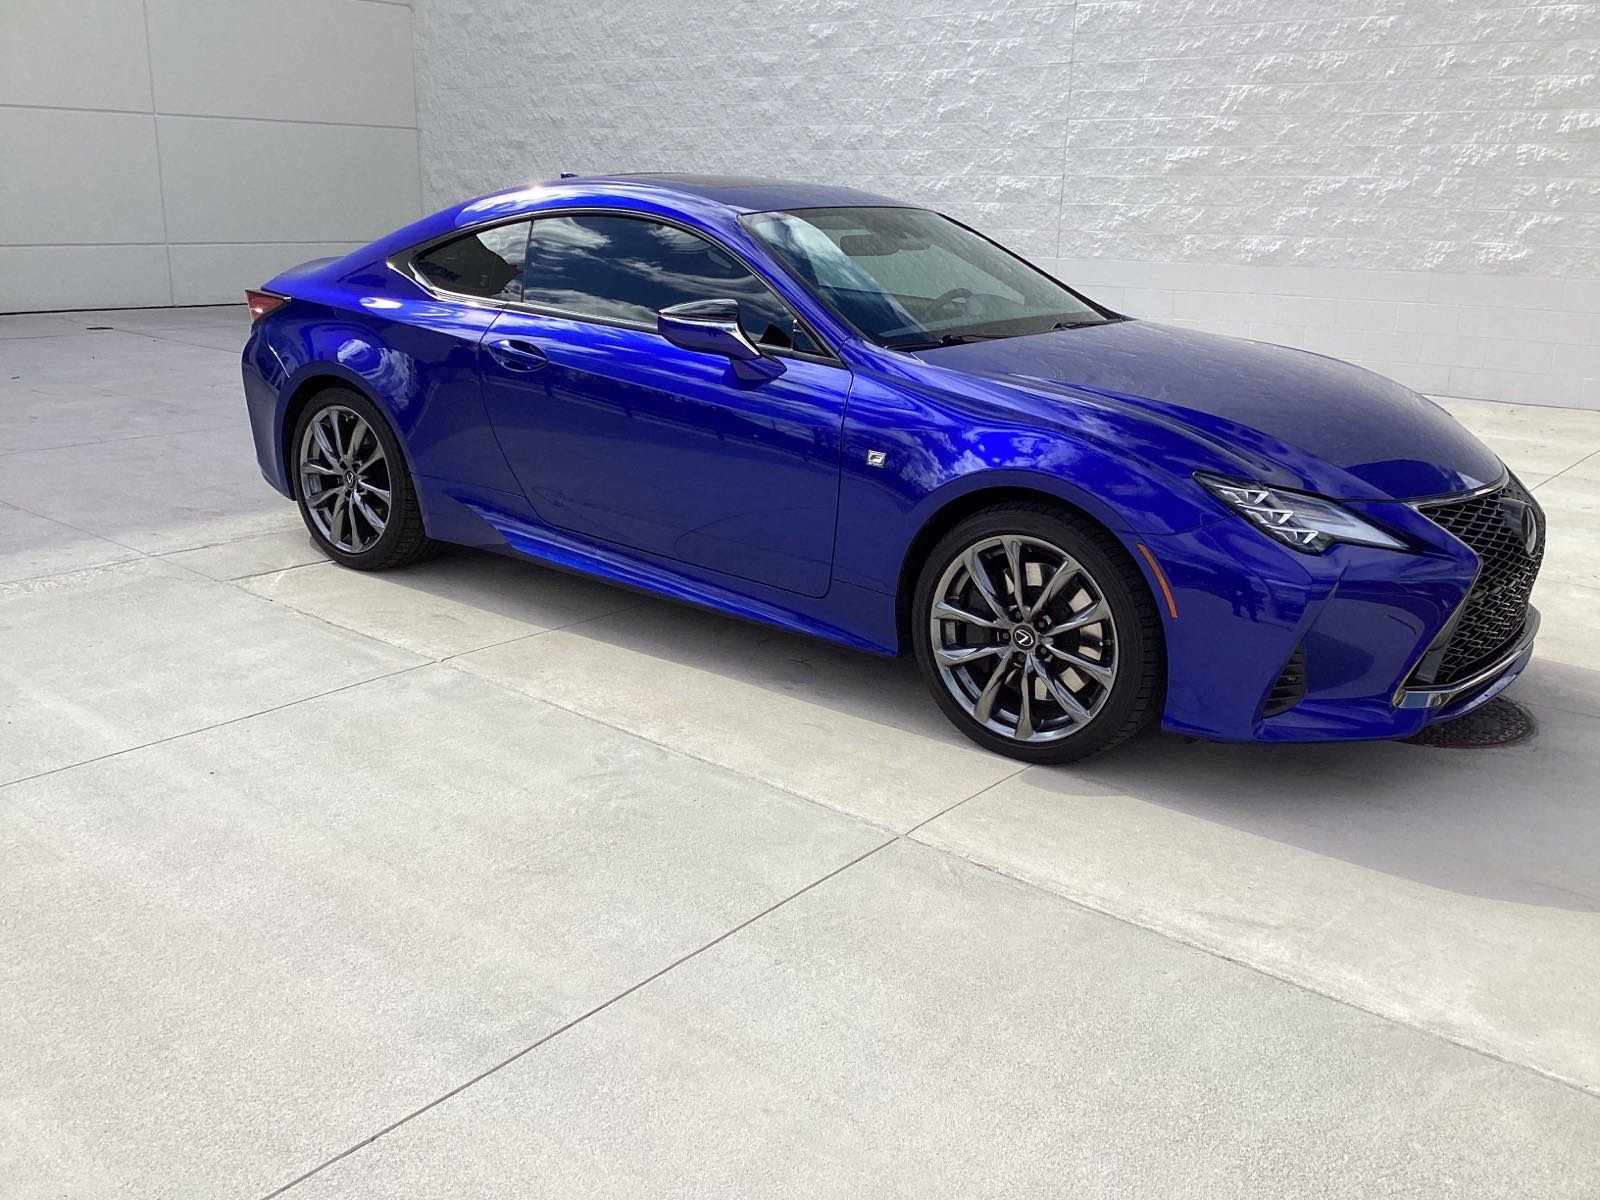 Pre-Owned 2020 Lexus RC RC 300 F SPORT Coupe in Merriam #XR508 | Hendrick  Chevrolet Shawnee Mission